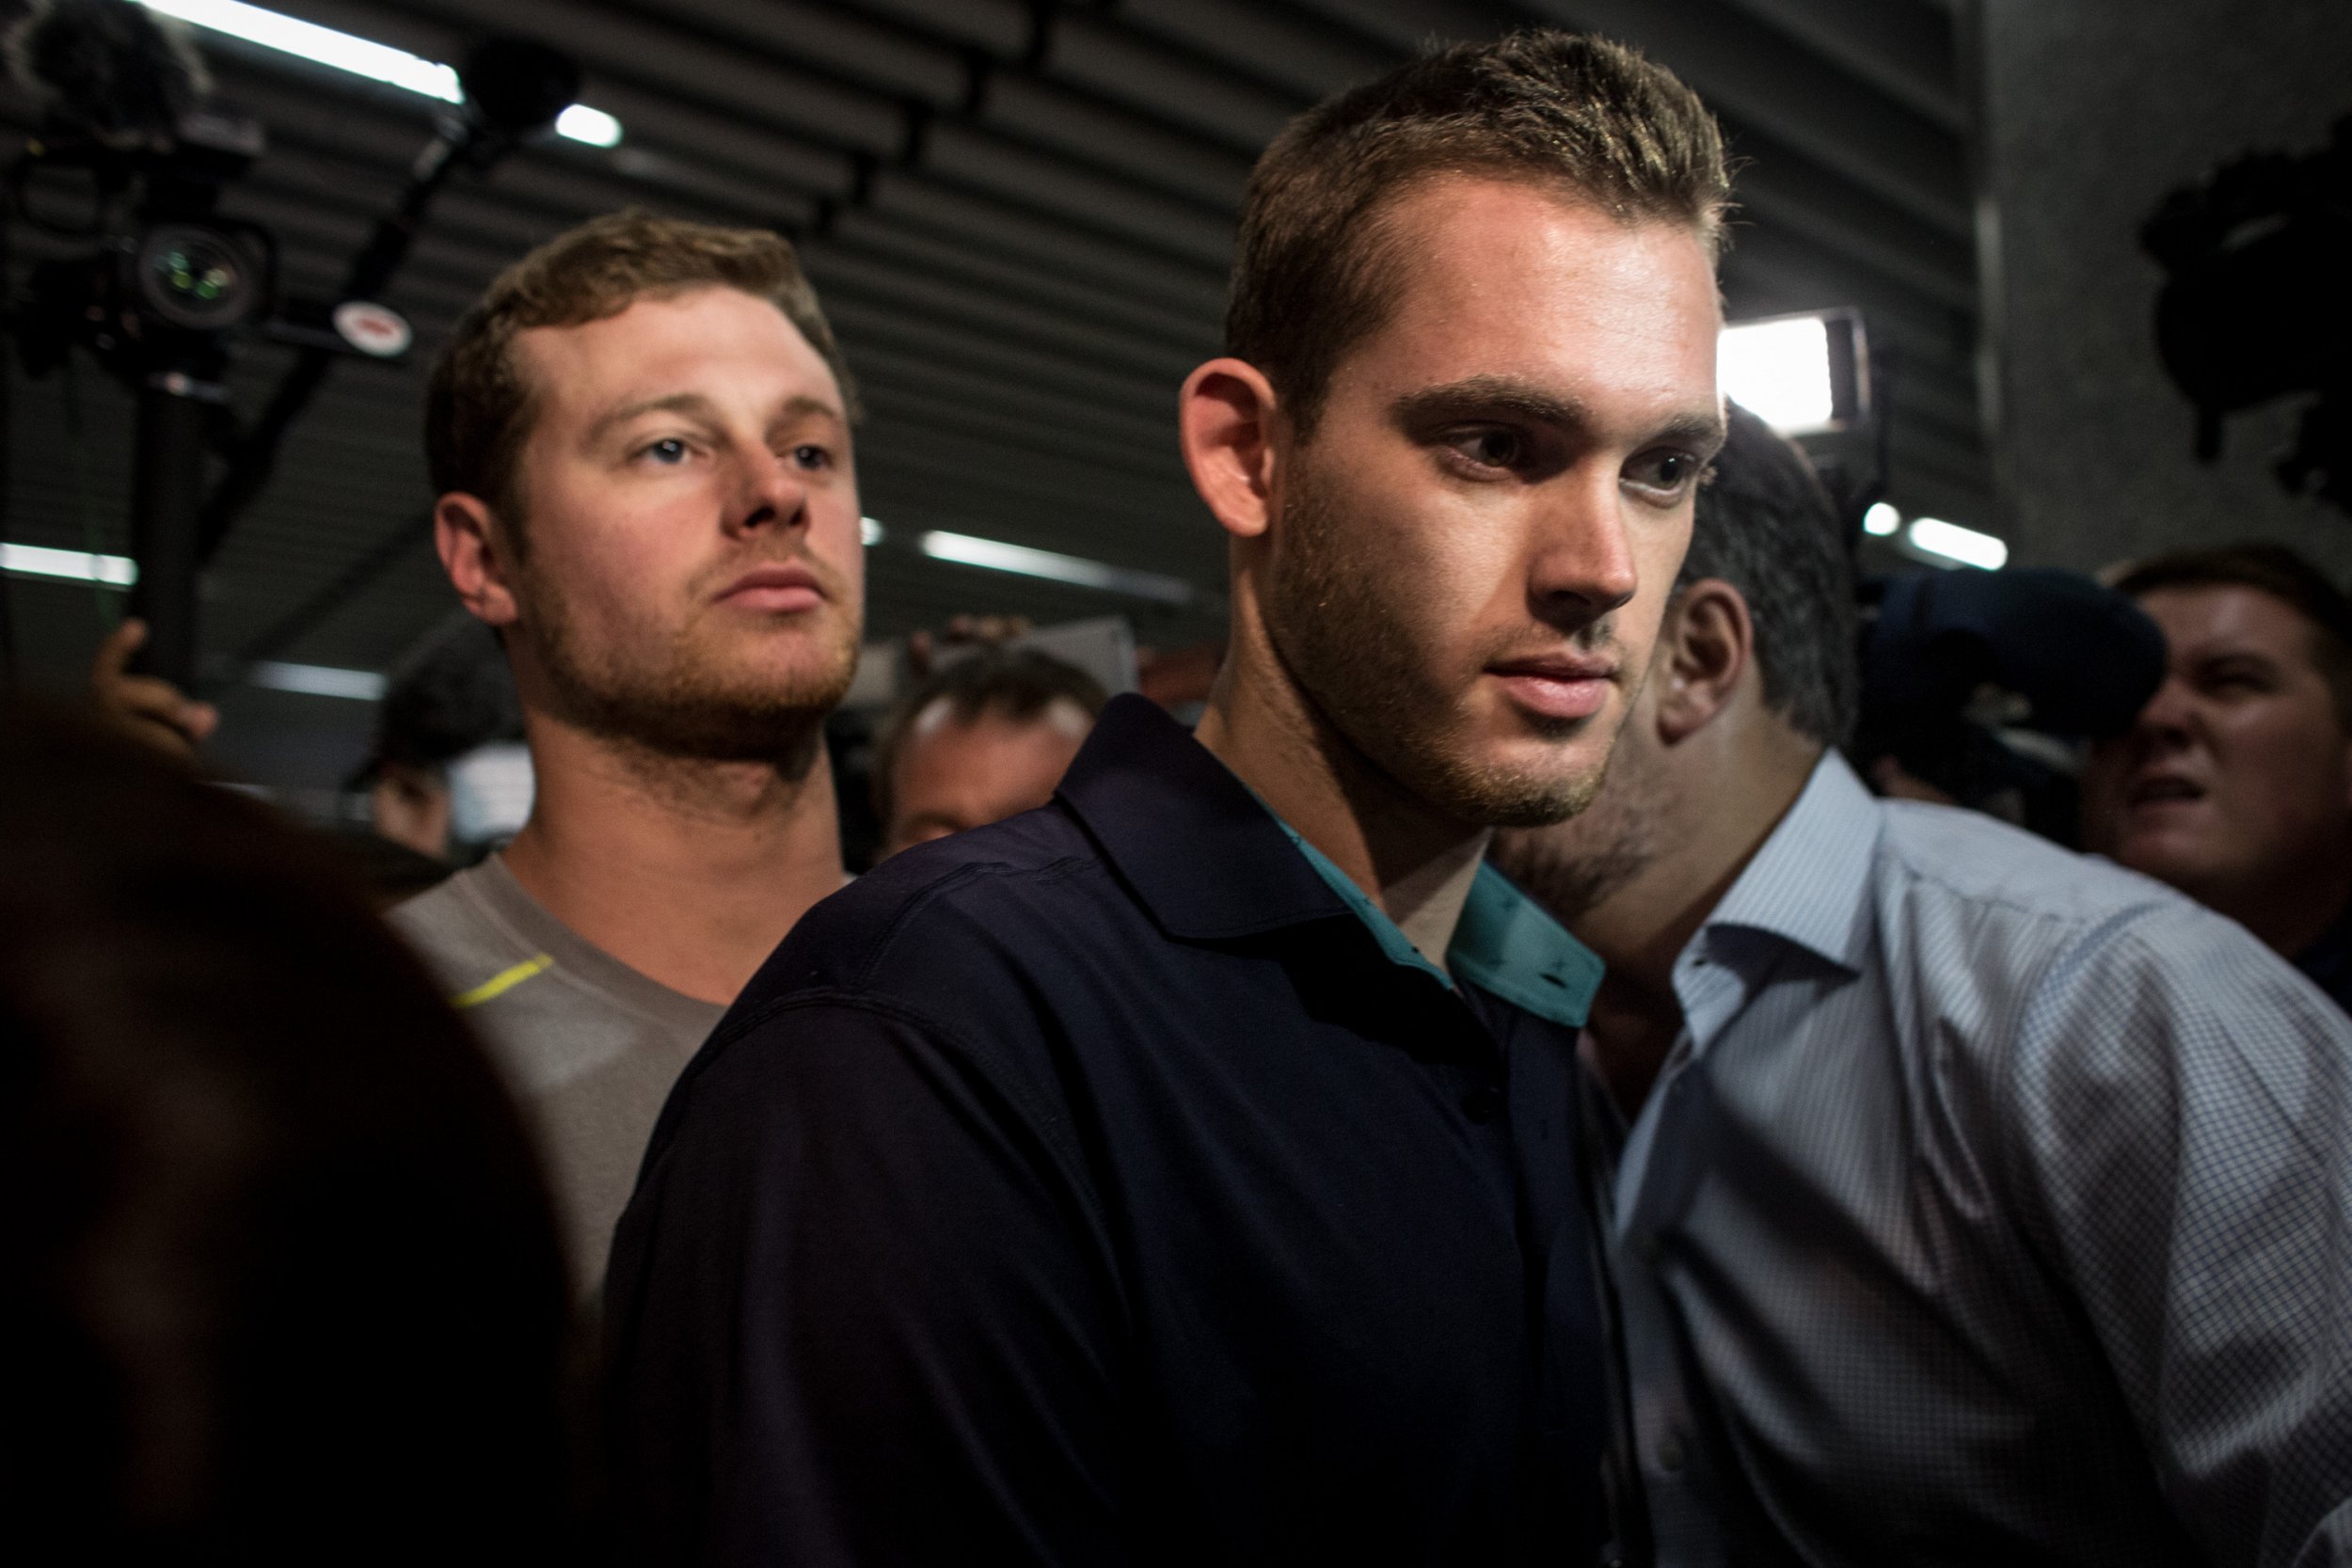 US swimmers Gunnar Bentz, right, and Jack Conger